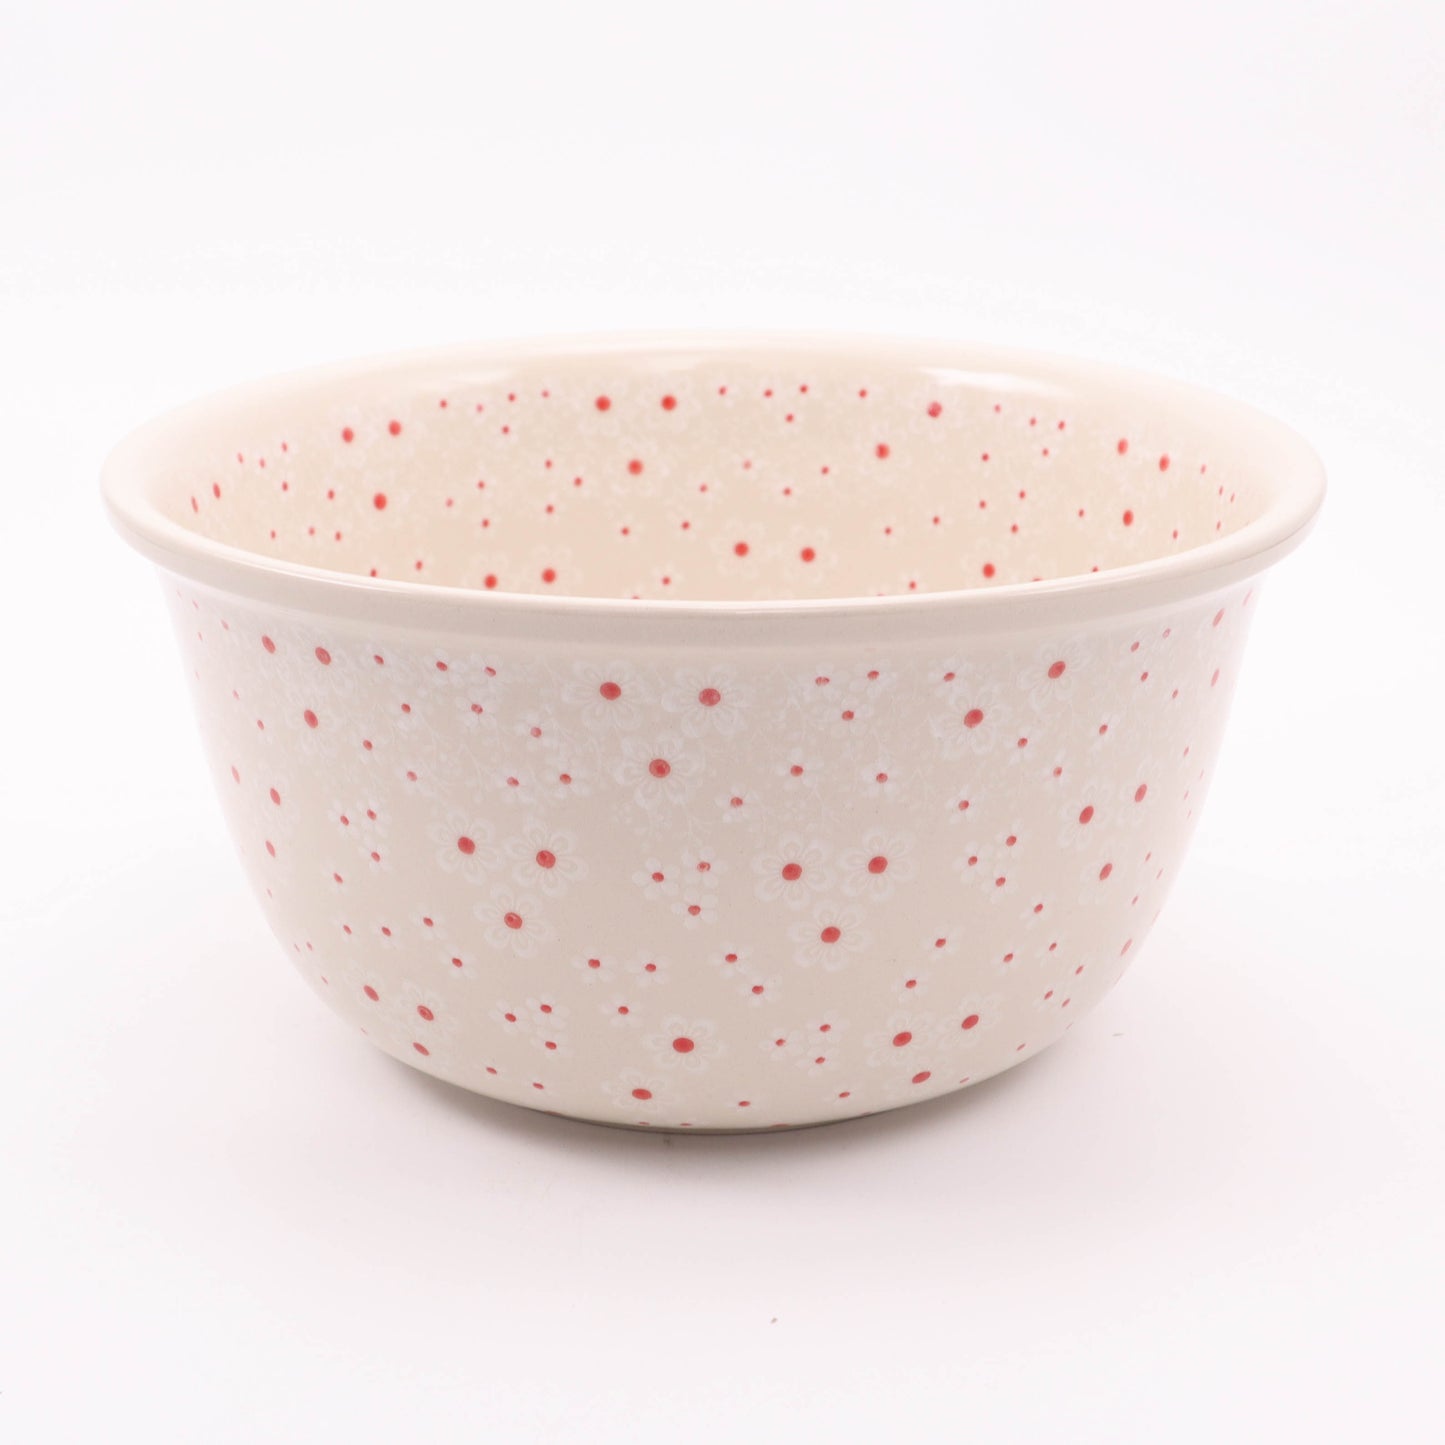 10.5"x5" Bowl. Pattern: Sugar and Spice